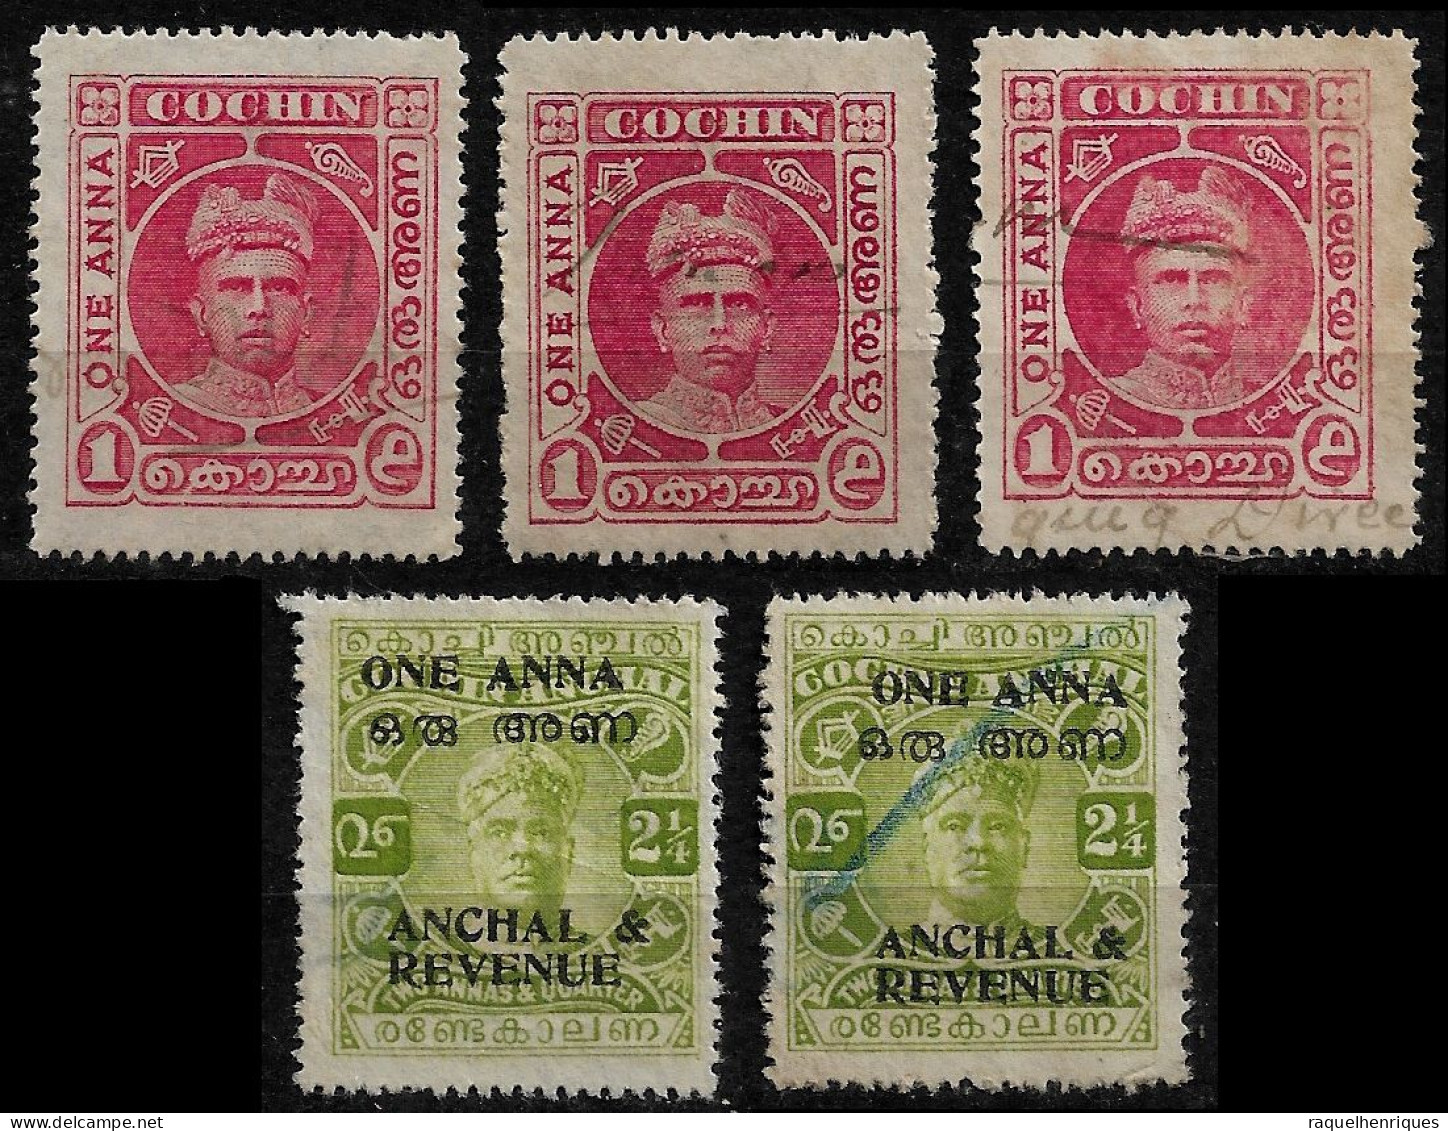 INDIA COCHIN TAX STAMPS USED (NP#100-P24-L5) - Cochin